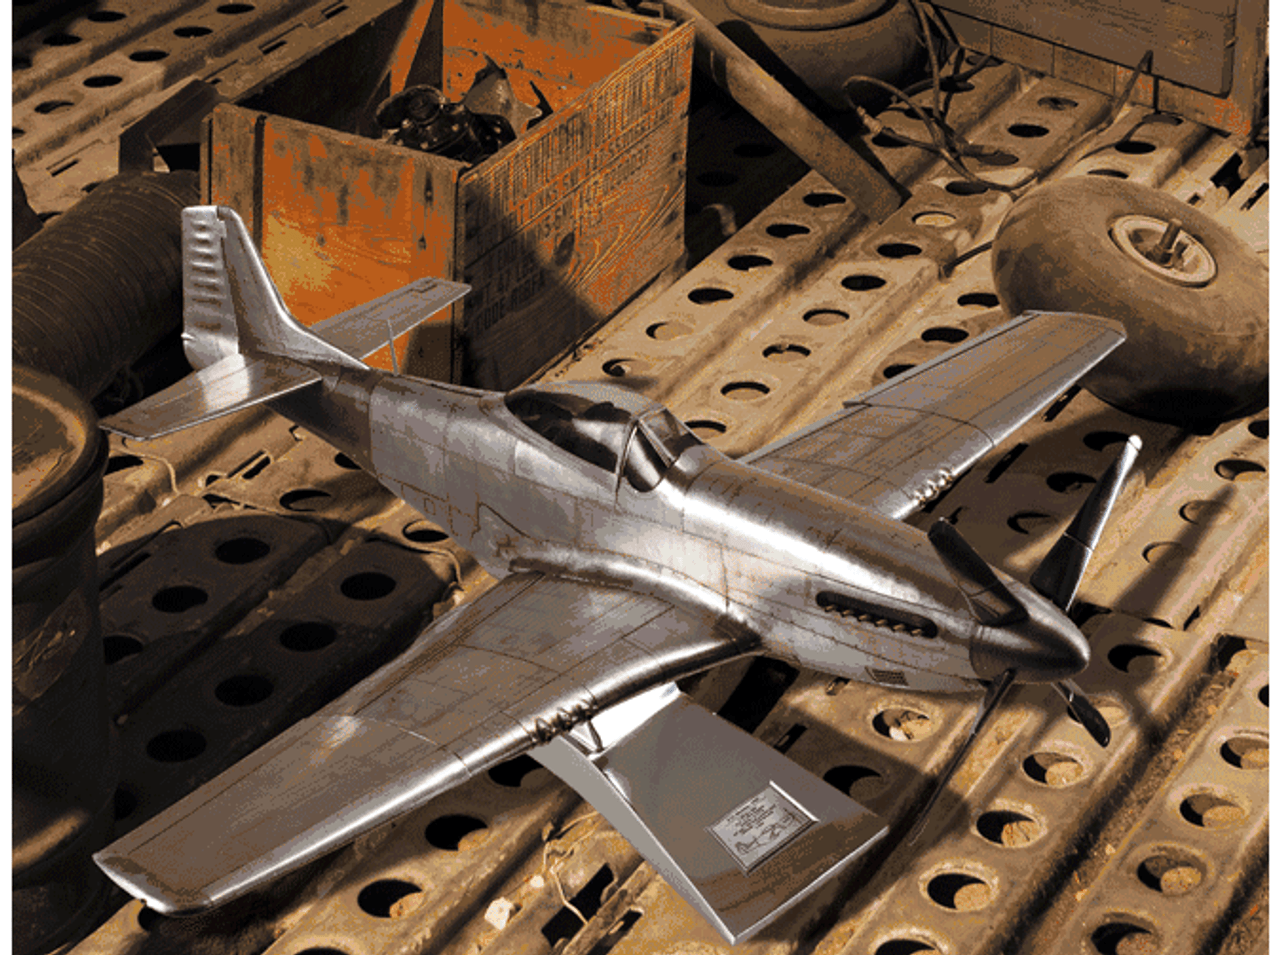 Buy Wholesale mustang plane For Vintage Collections And Display